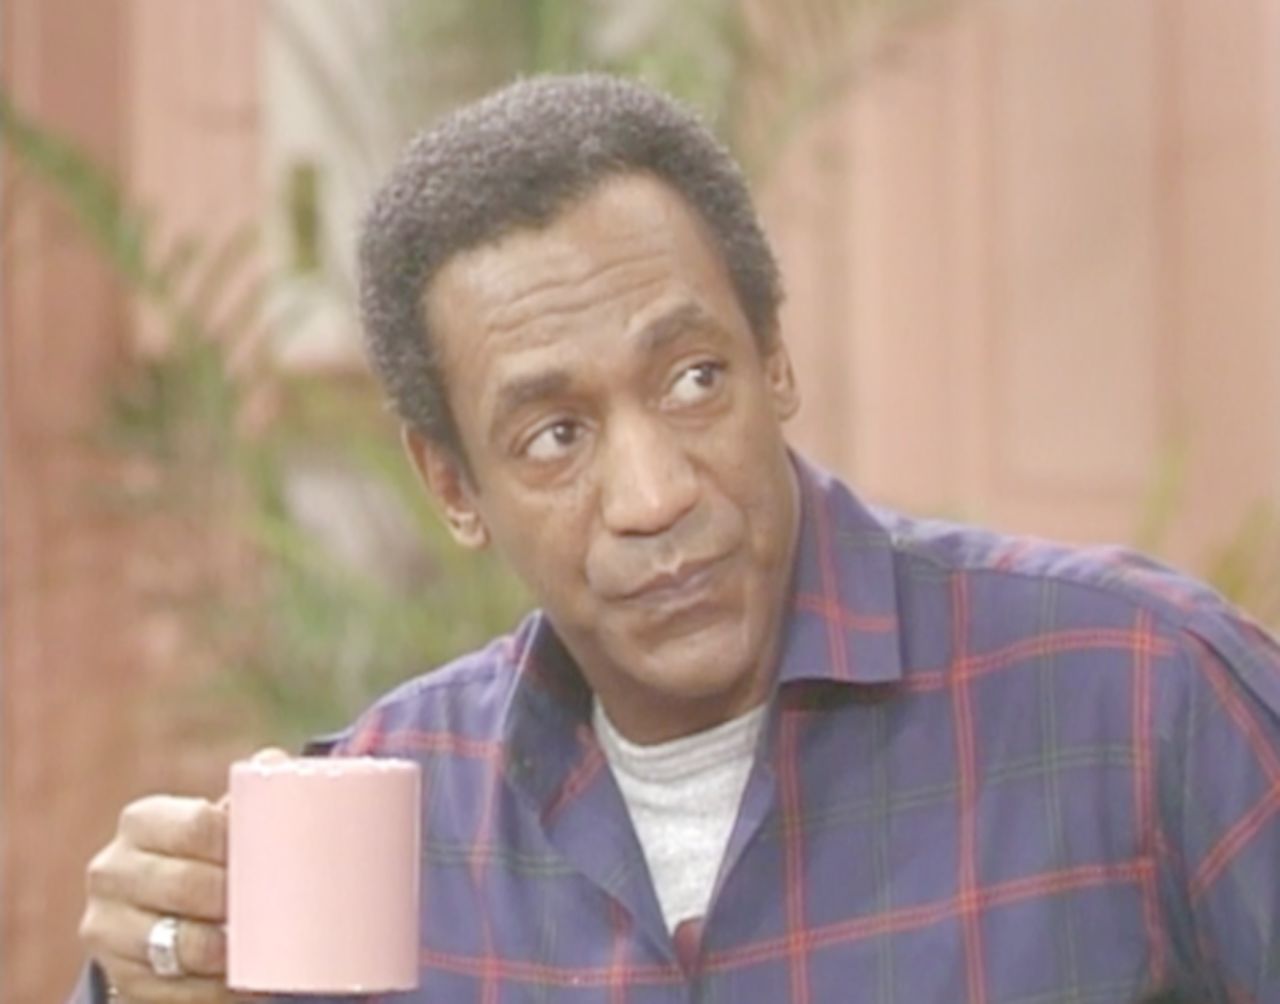 "The Cosby Show" dominated the ratings through much of the mid- and late 1980s and remains a standard against which family comedies are measured. (In recent months, reruns have been pulled from TV Land after allegations about Bill Cosby and sexual assault.)